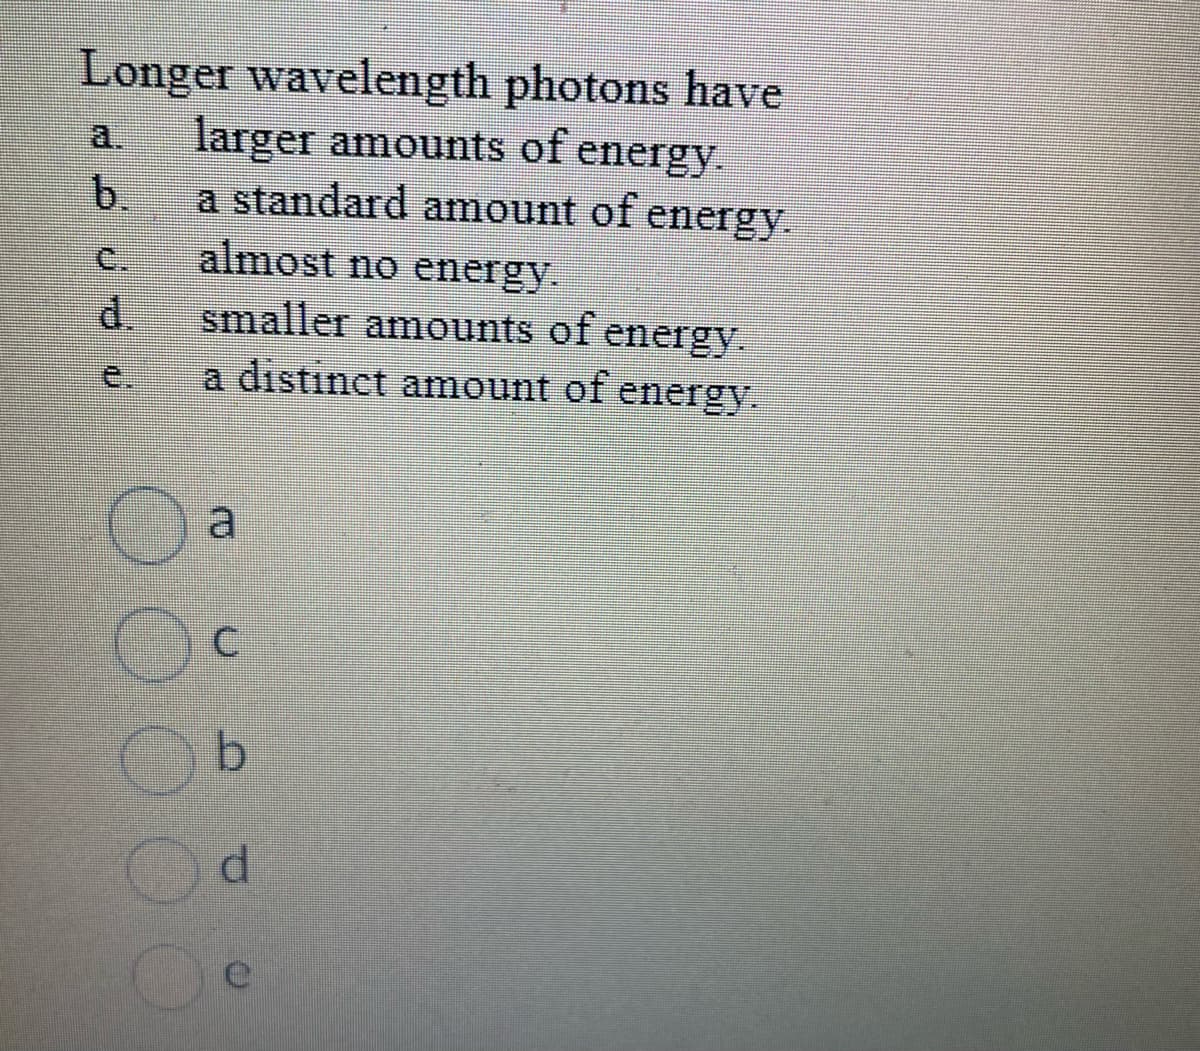 Longer wavelength photons have
a. larger amounts of energy.
b
a standard amount of energy.
almost no energy.
smaller amounts of energy.
a distinct amount of energy.
C
b
d